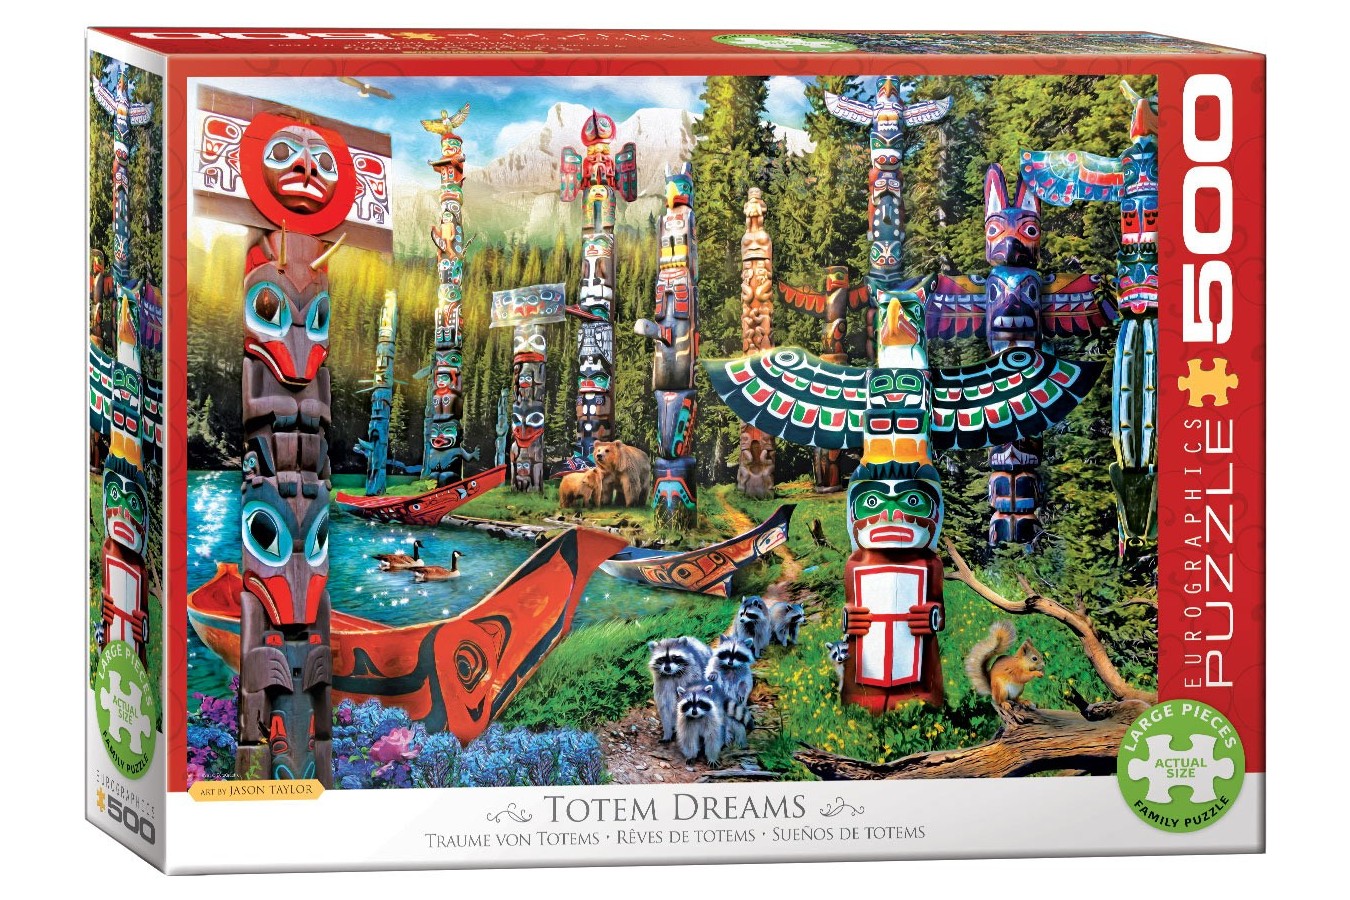 Puzzle Eurographics - Totem Dreams, 500 piese XXL (6500-5361)